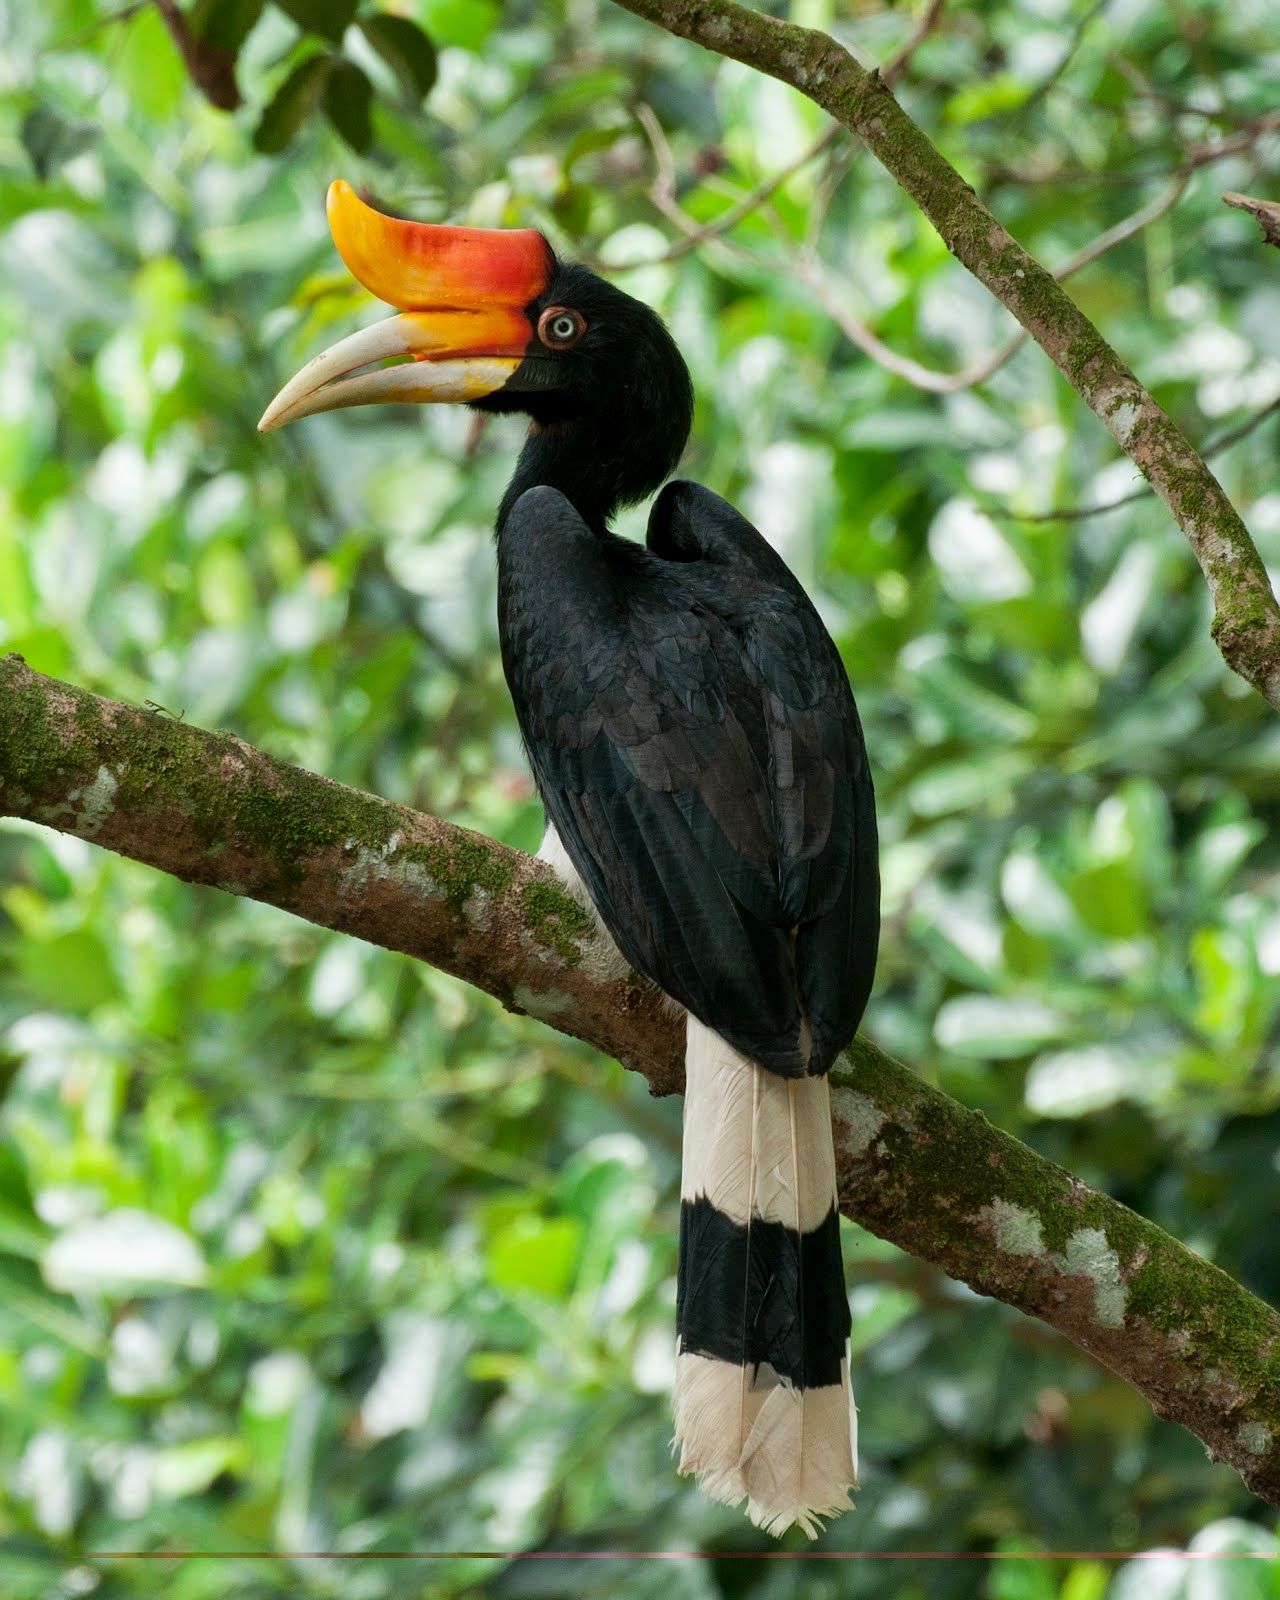 The rhinoceros hornbill eats fruit, insects, small reptiles, rodents ...